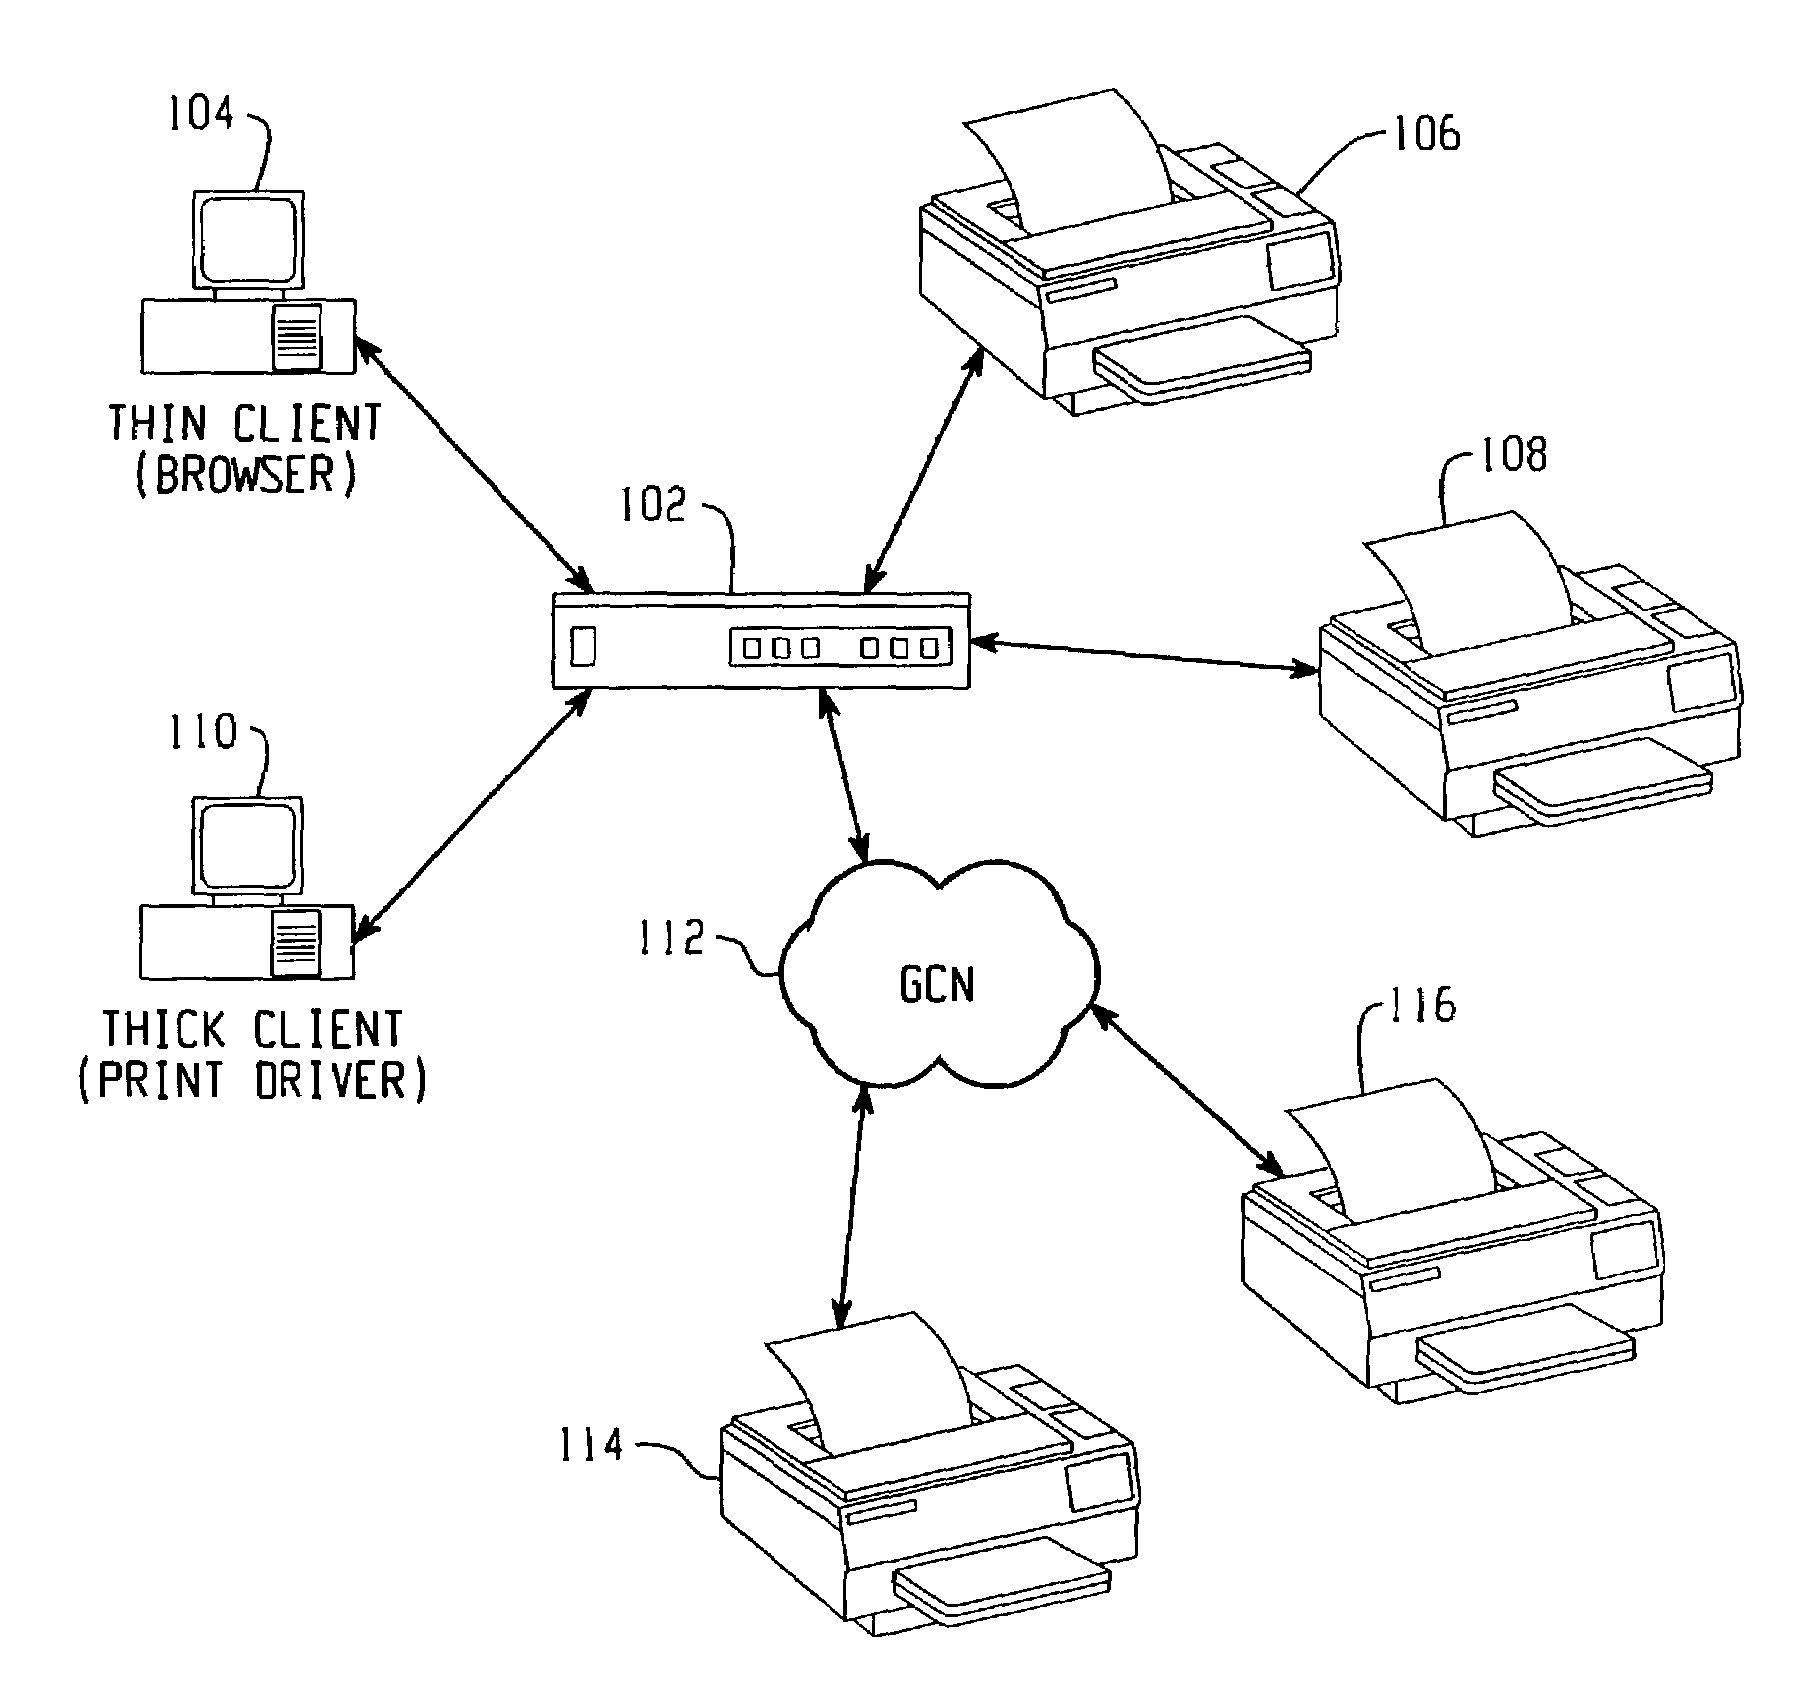 Method and system for preserving user identification when generating image data from a remote location